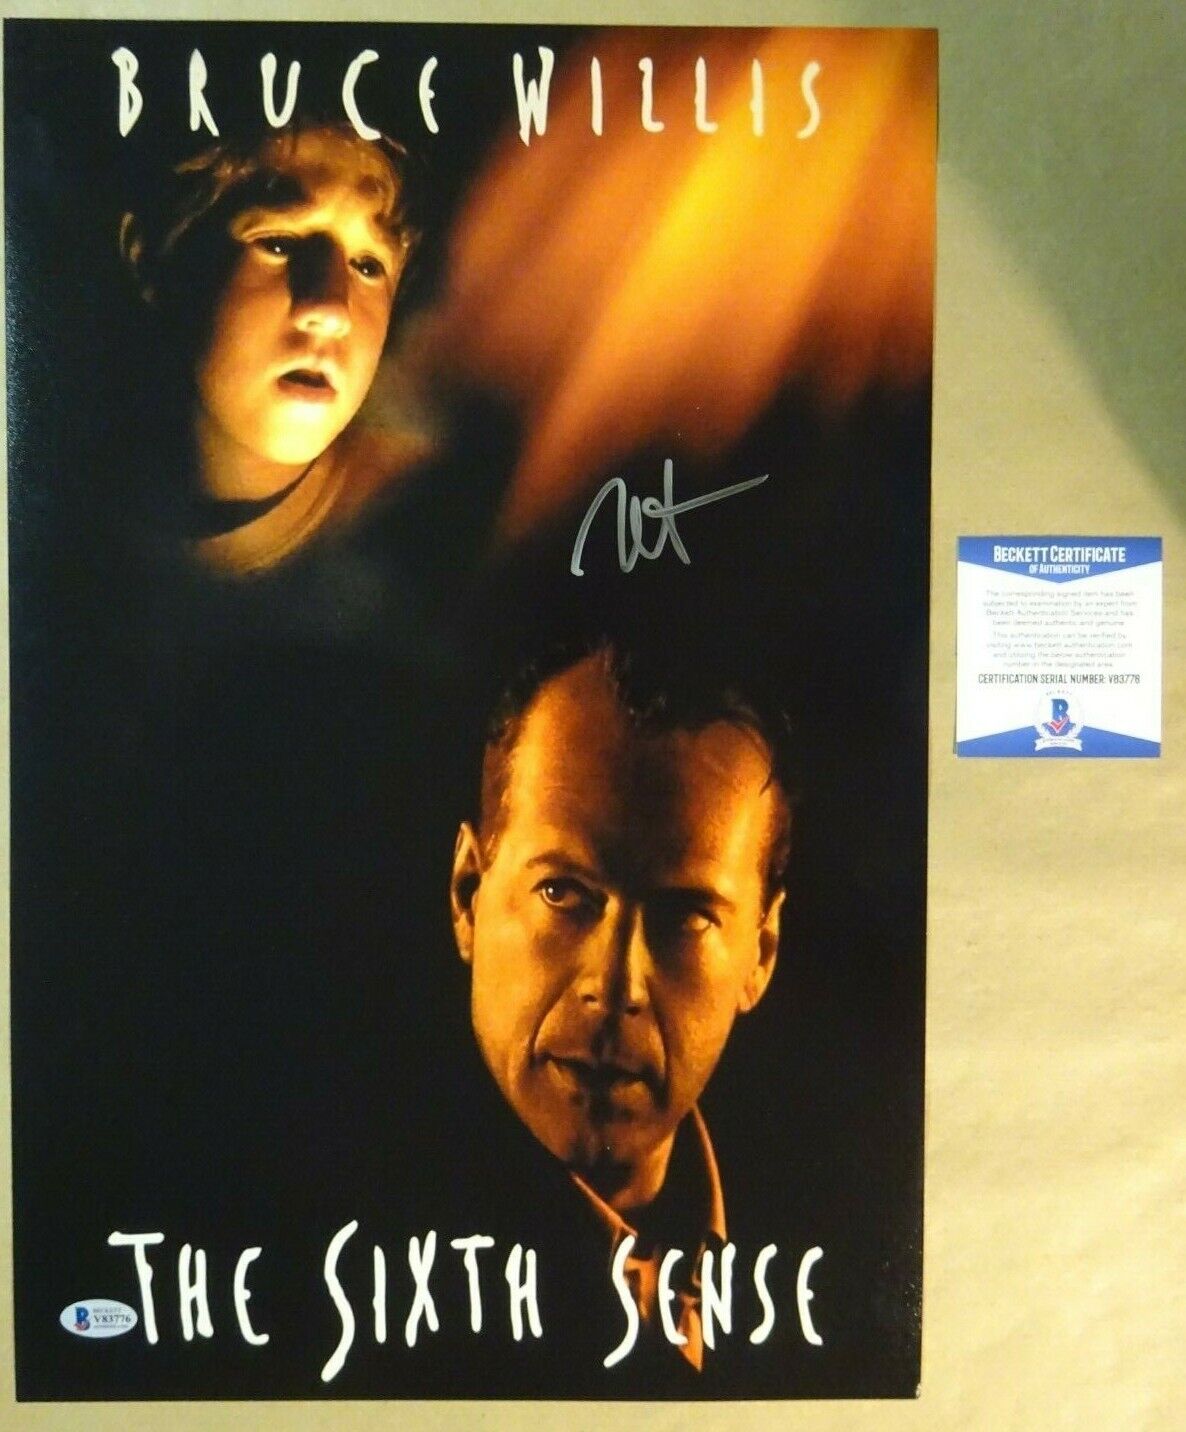 Signed HALEY JOEL OSMENT Autographed The Sixth Sense Photo Poster painting 12x18